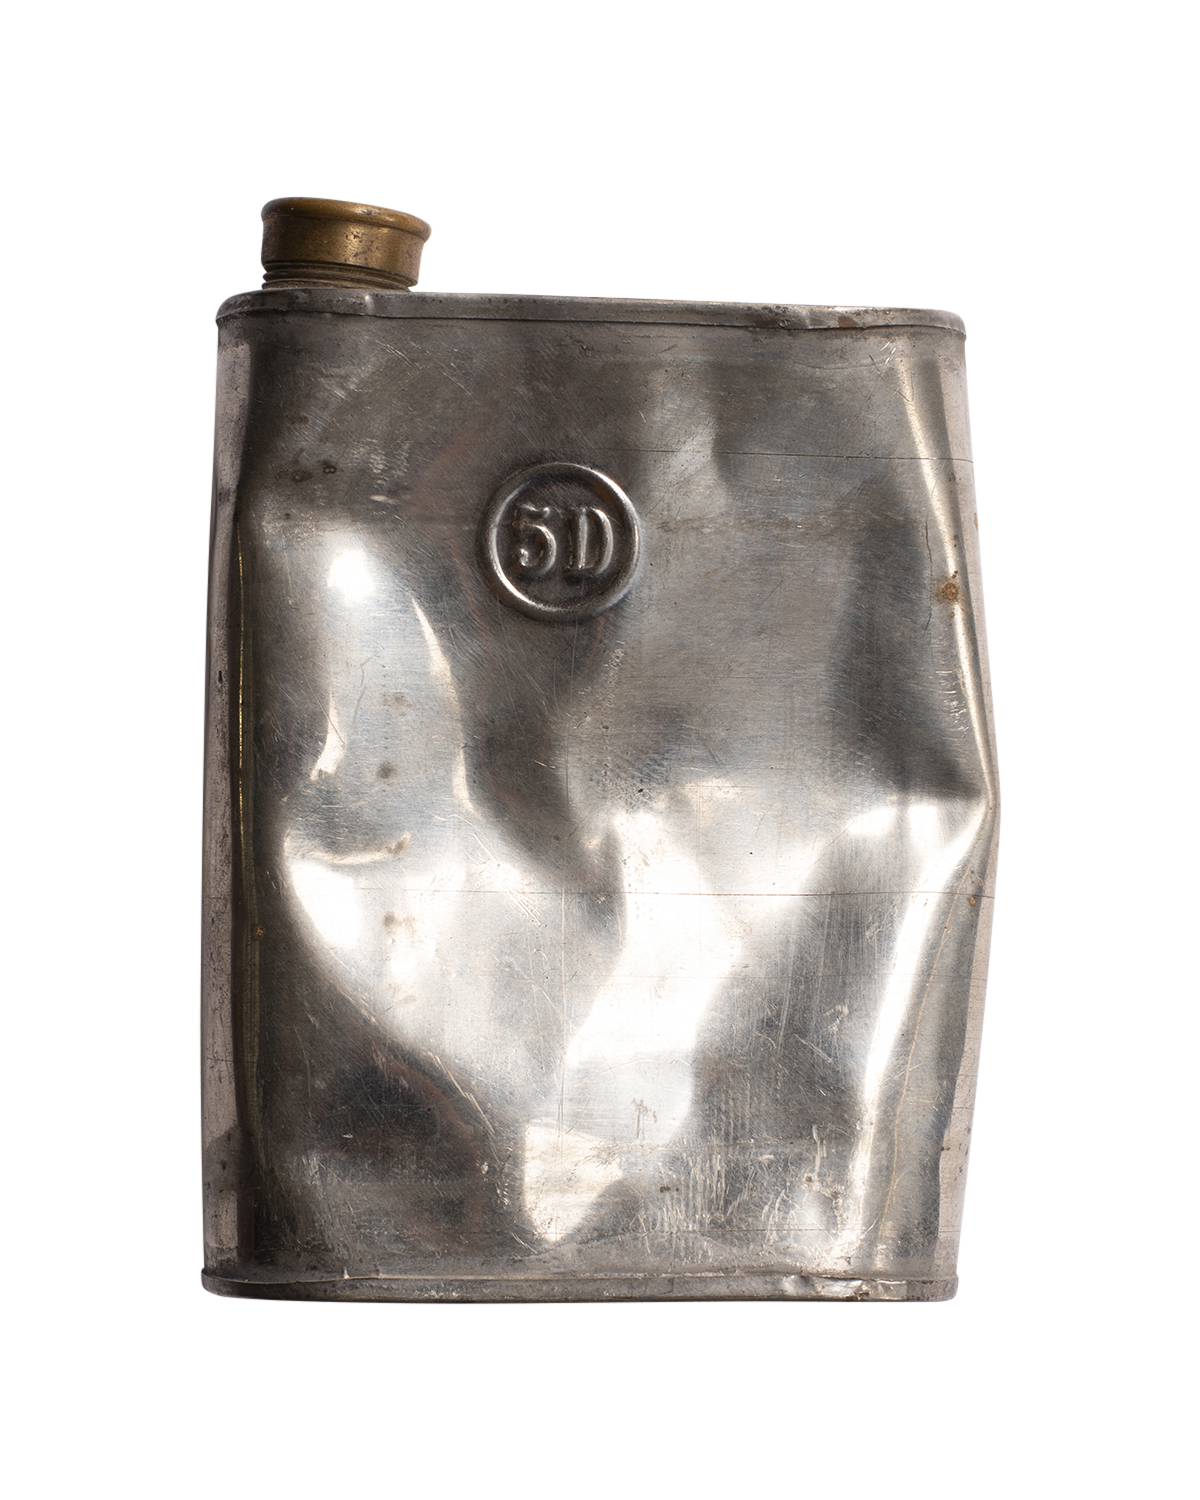 Vintage French 5D Oil Can